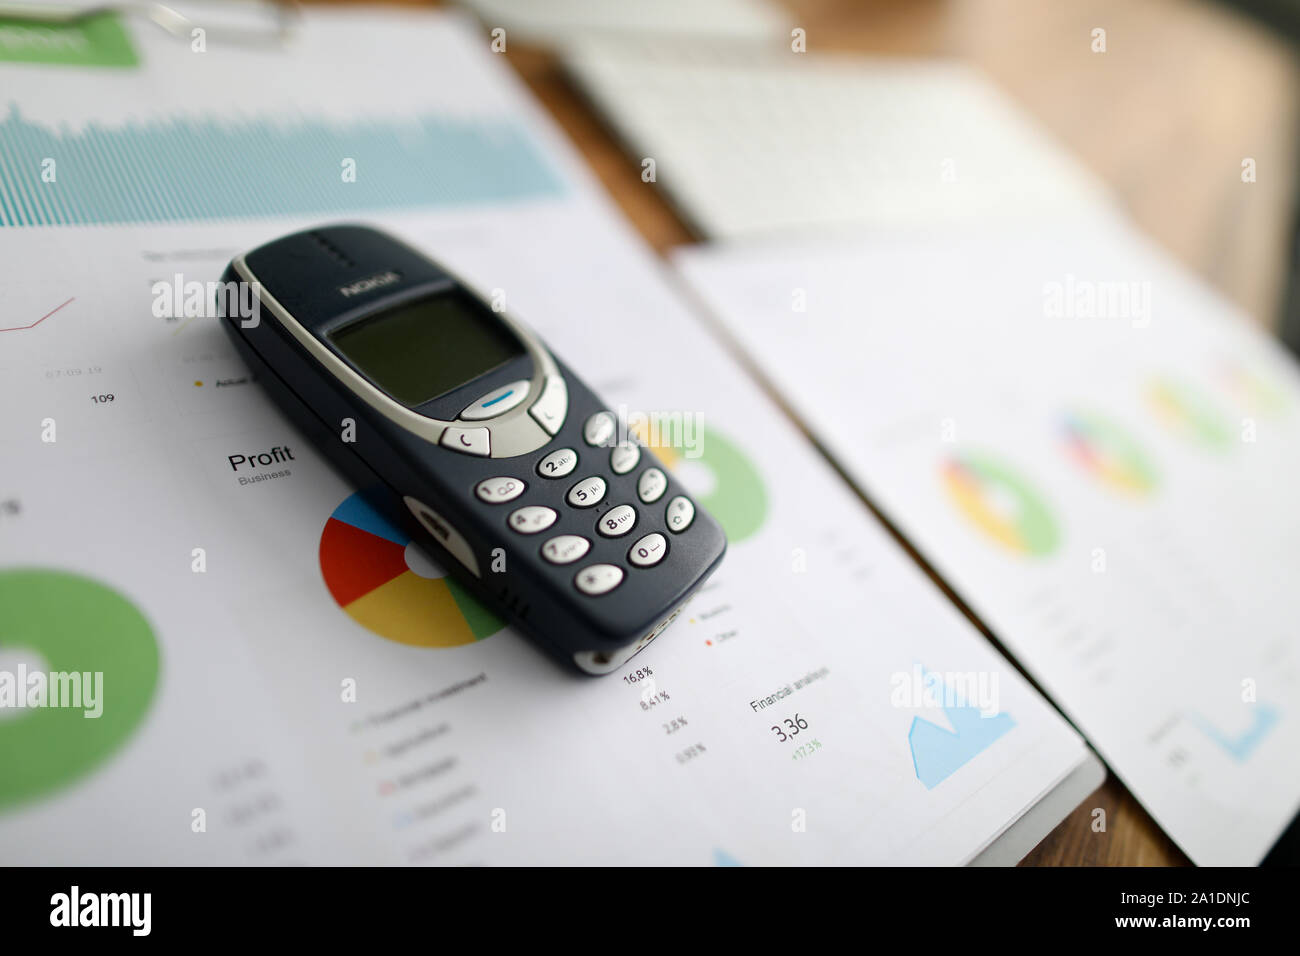 Nokia 3310 ol phone with business chart Stock Photo